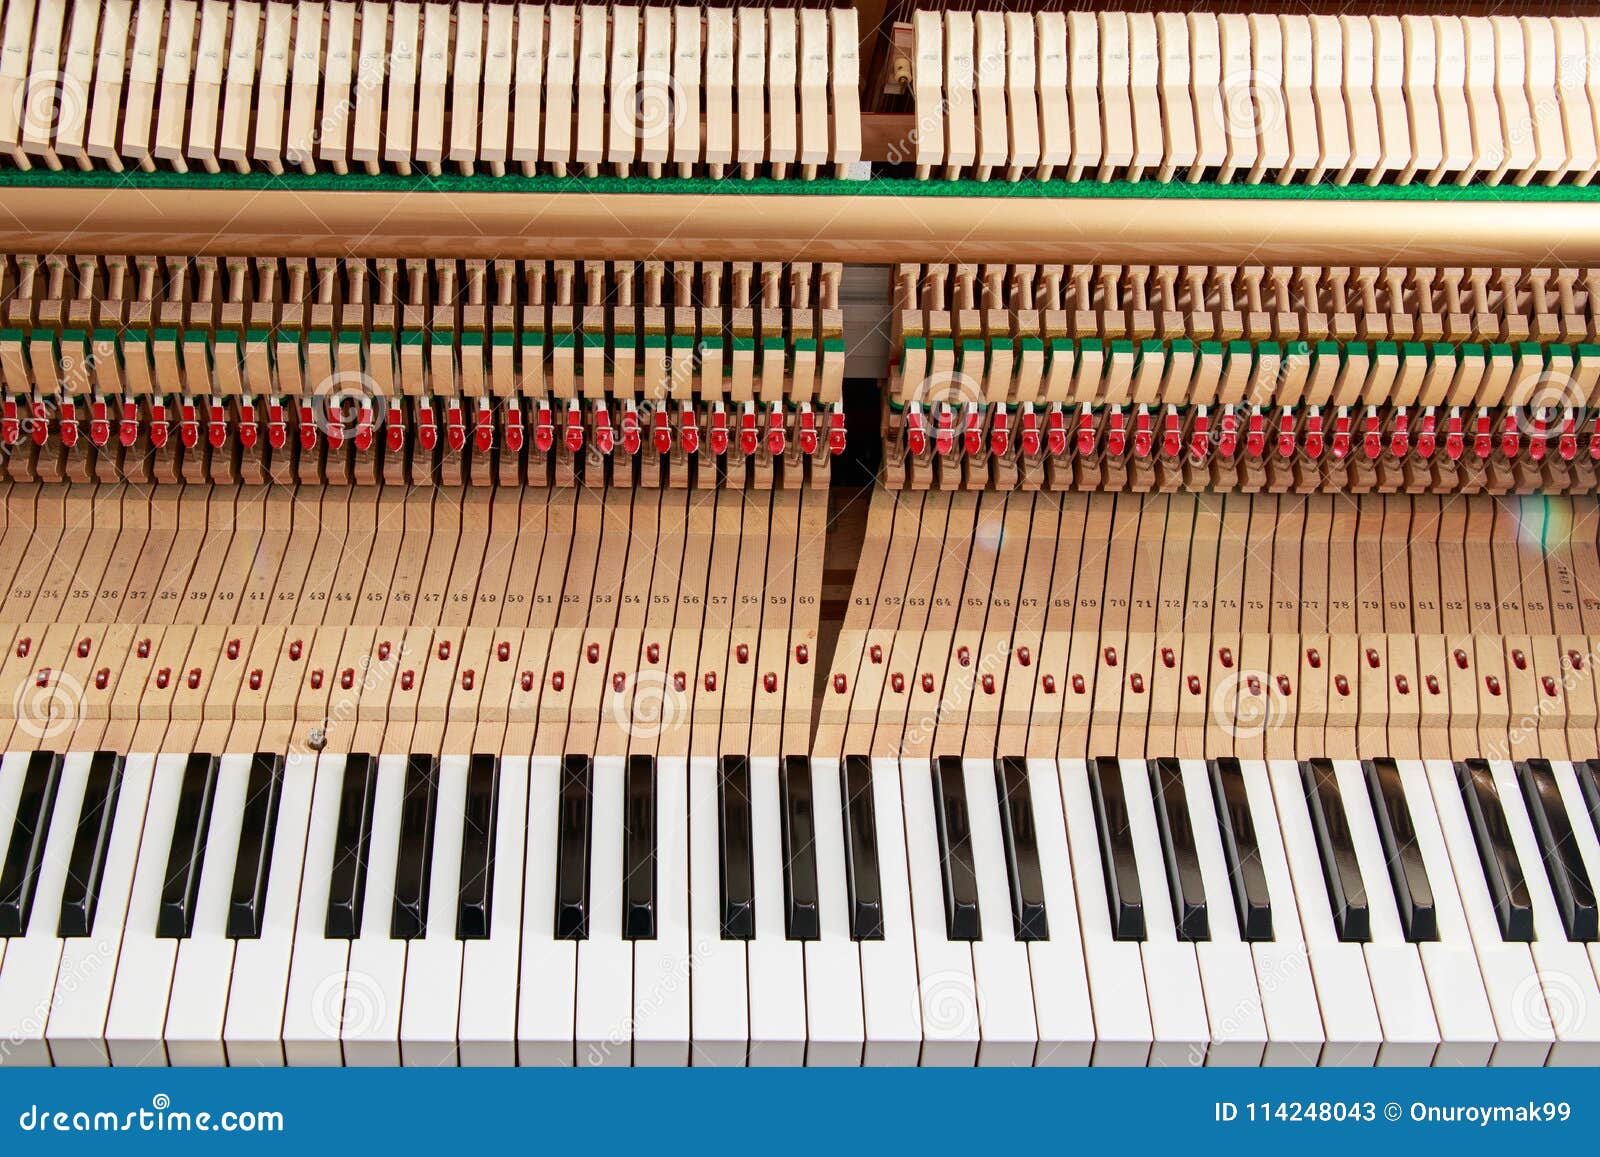 Close Up Image of Grand Piano Keys and Interior Showing Strings, Hammer and  Structure Background Stock Image - Image of closeup, black: 114248043